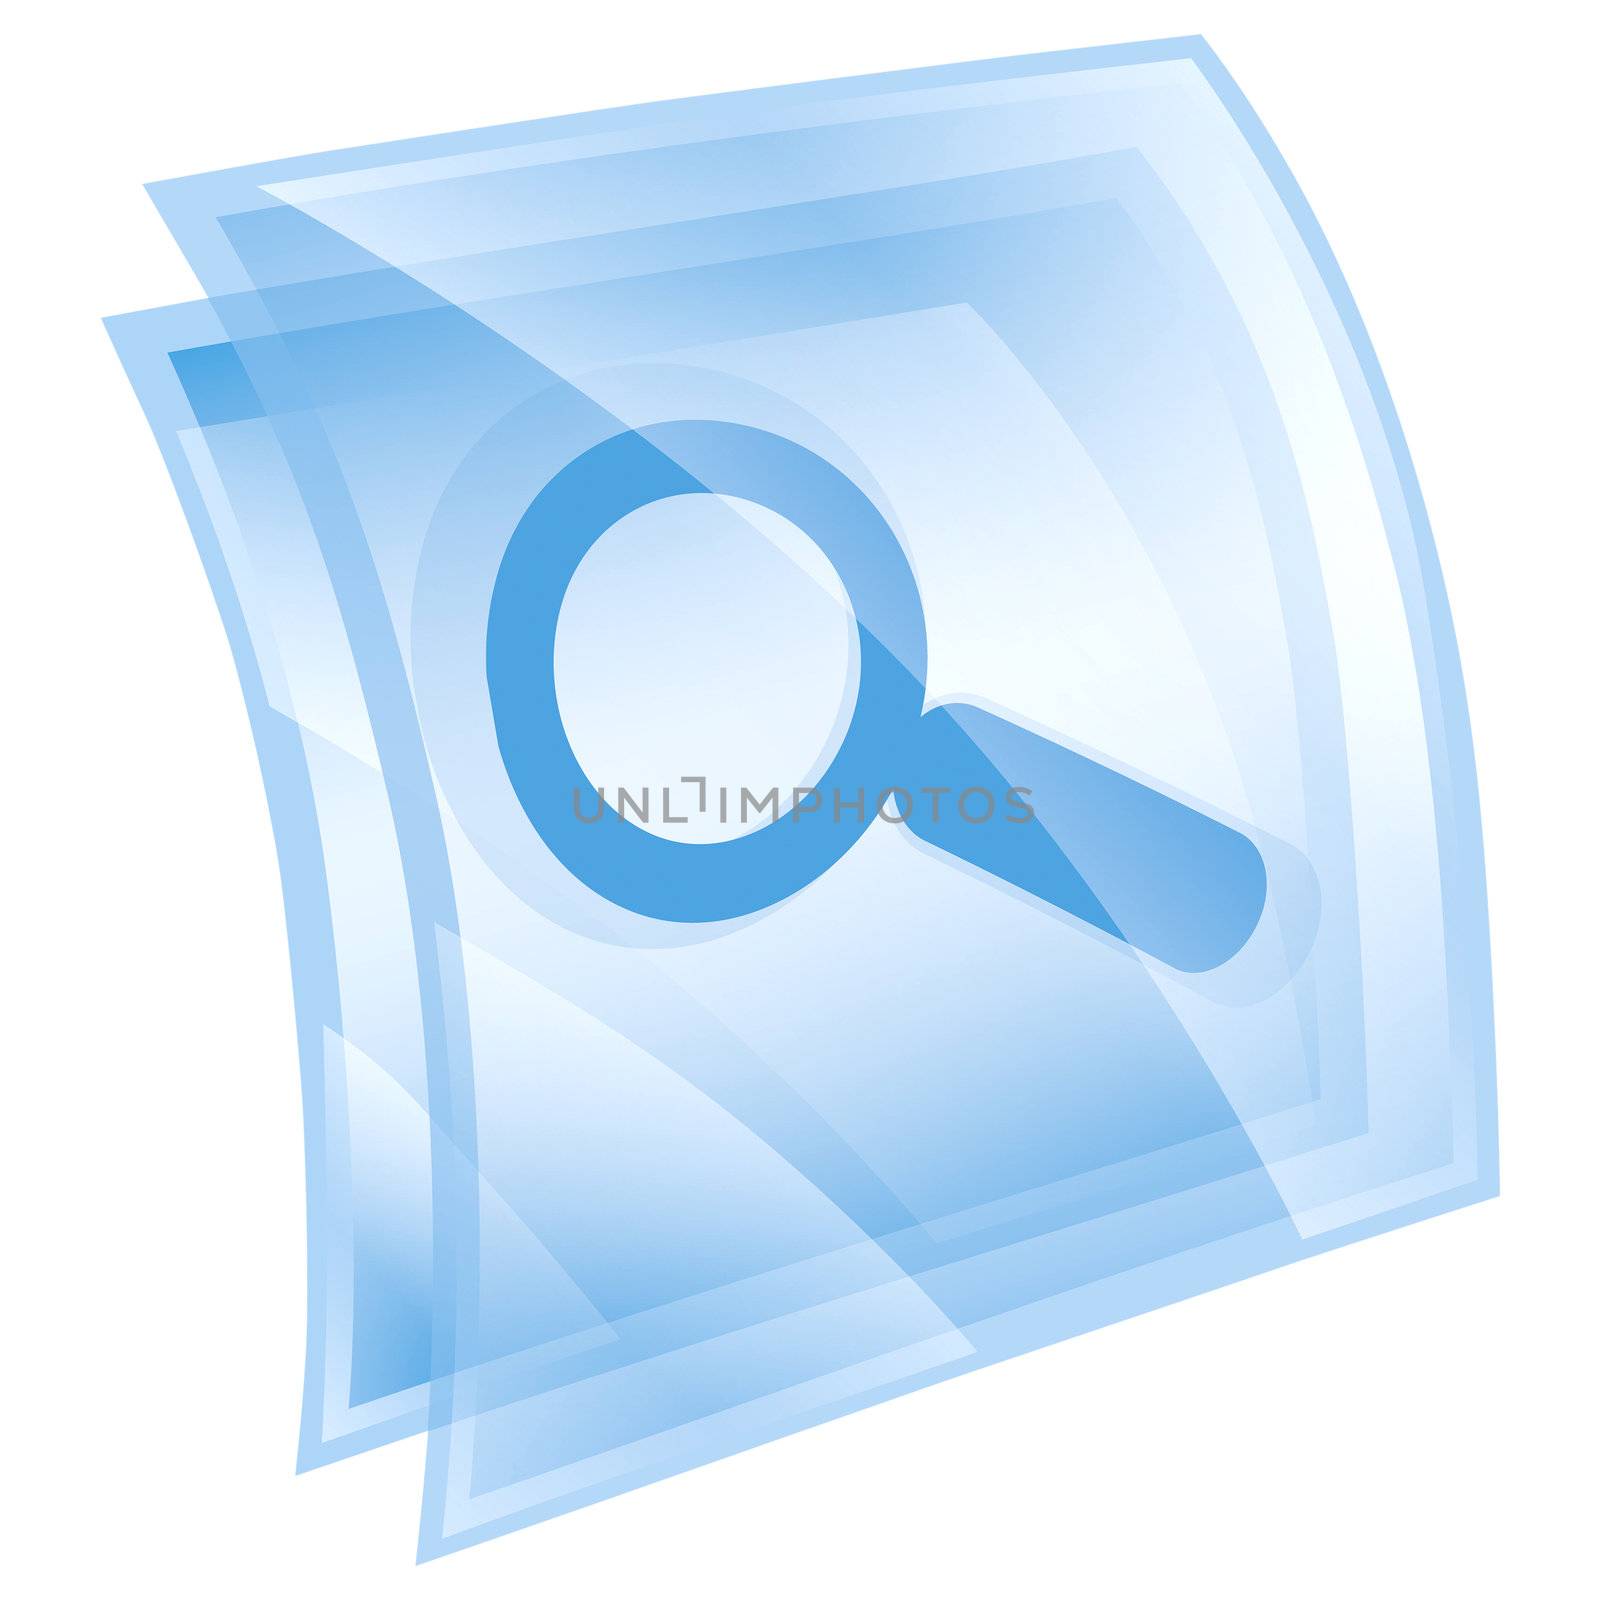 magnifier icon blue square, isolated on white background.